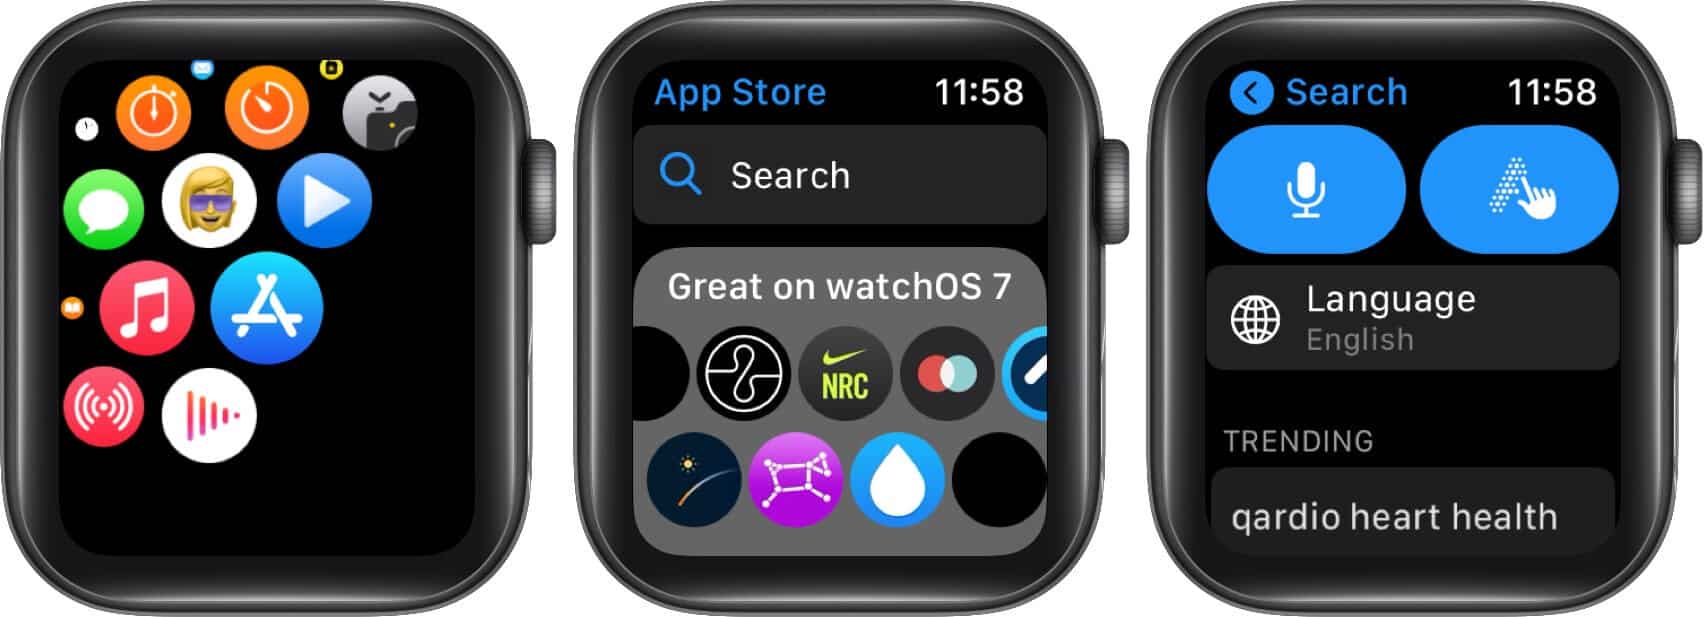 Open App Store tap Search and use Voice or Scribble on Apple Watch